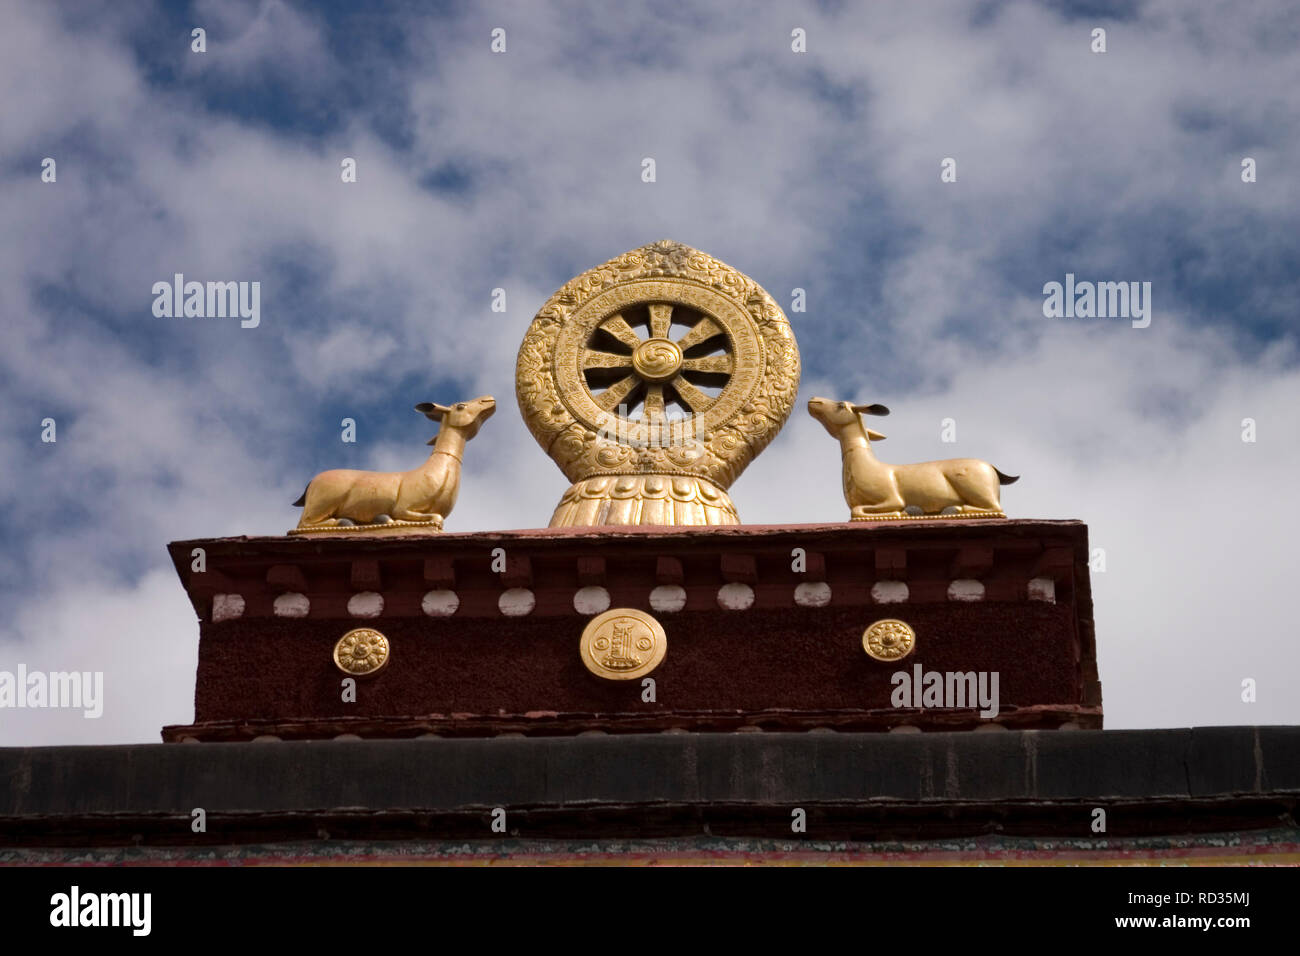 Golden deer icons on the roof of the jokhang temple Lhasa Tibet Stock Photo